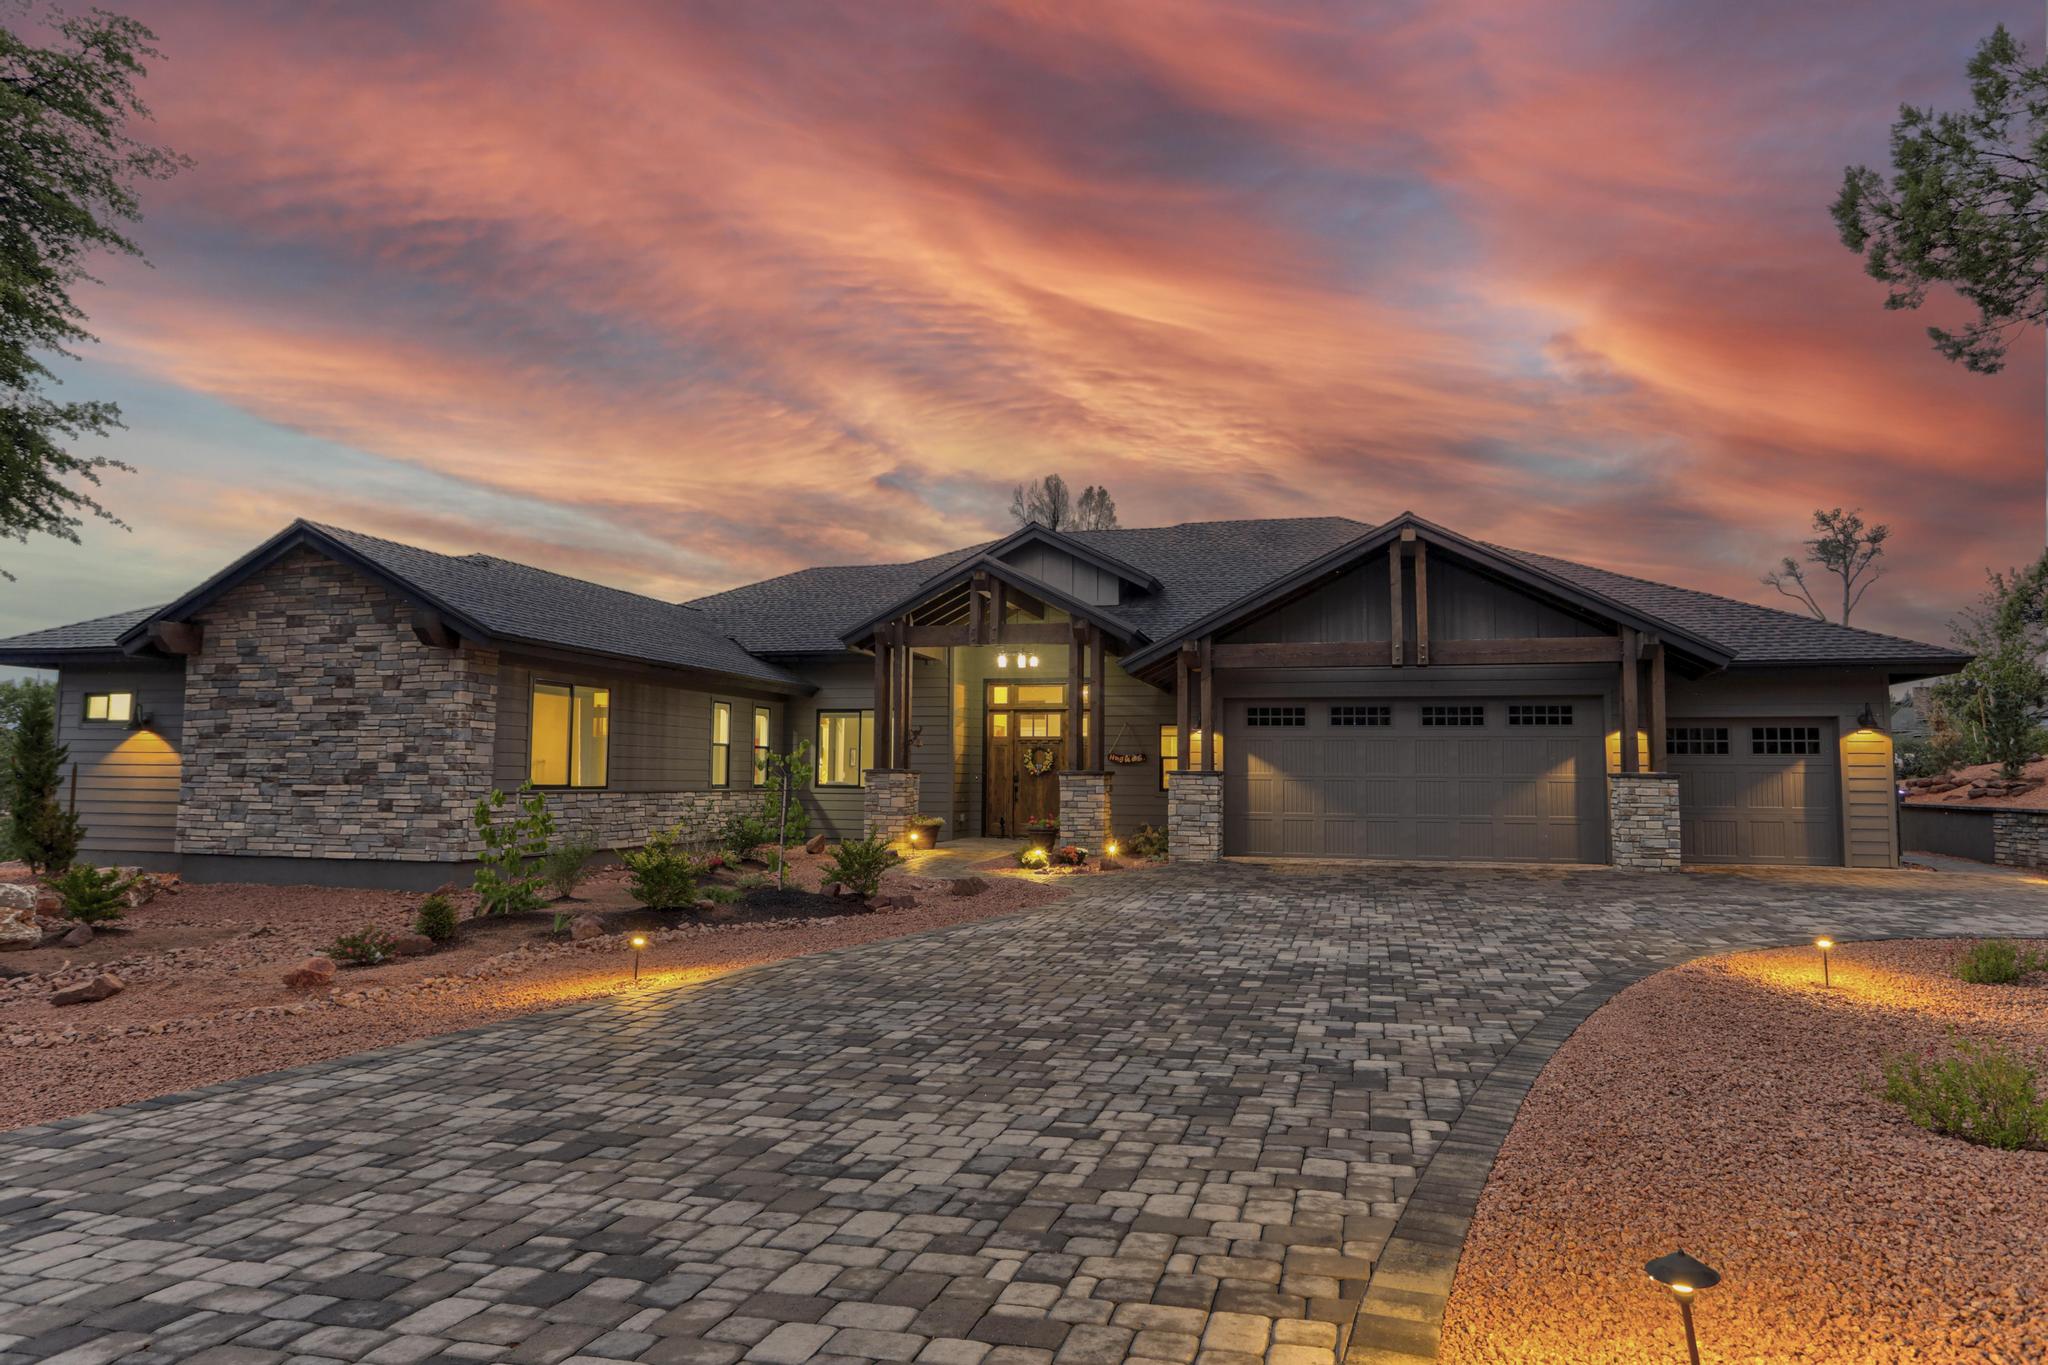 Scenic Dr. Custom Home Build in Payson Chapparal Pines